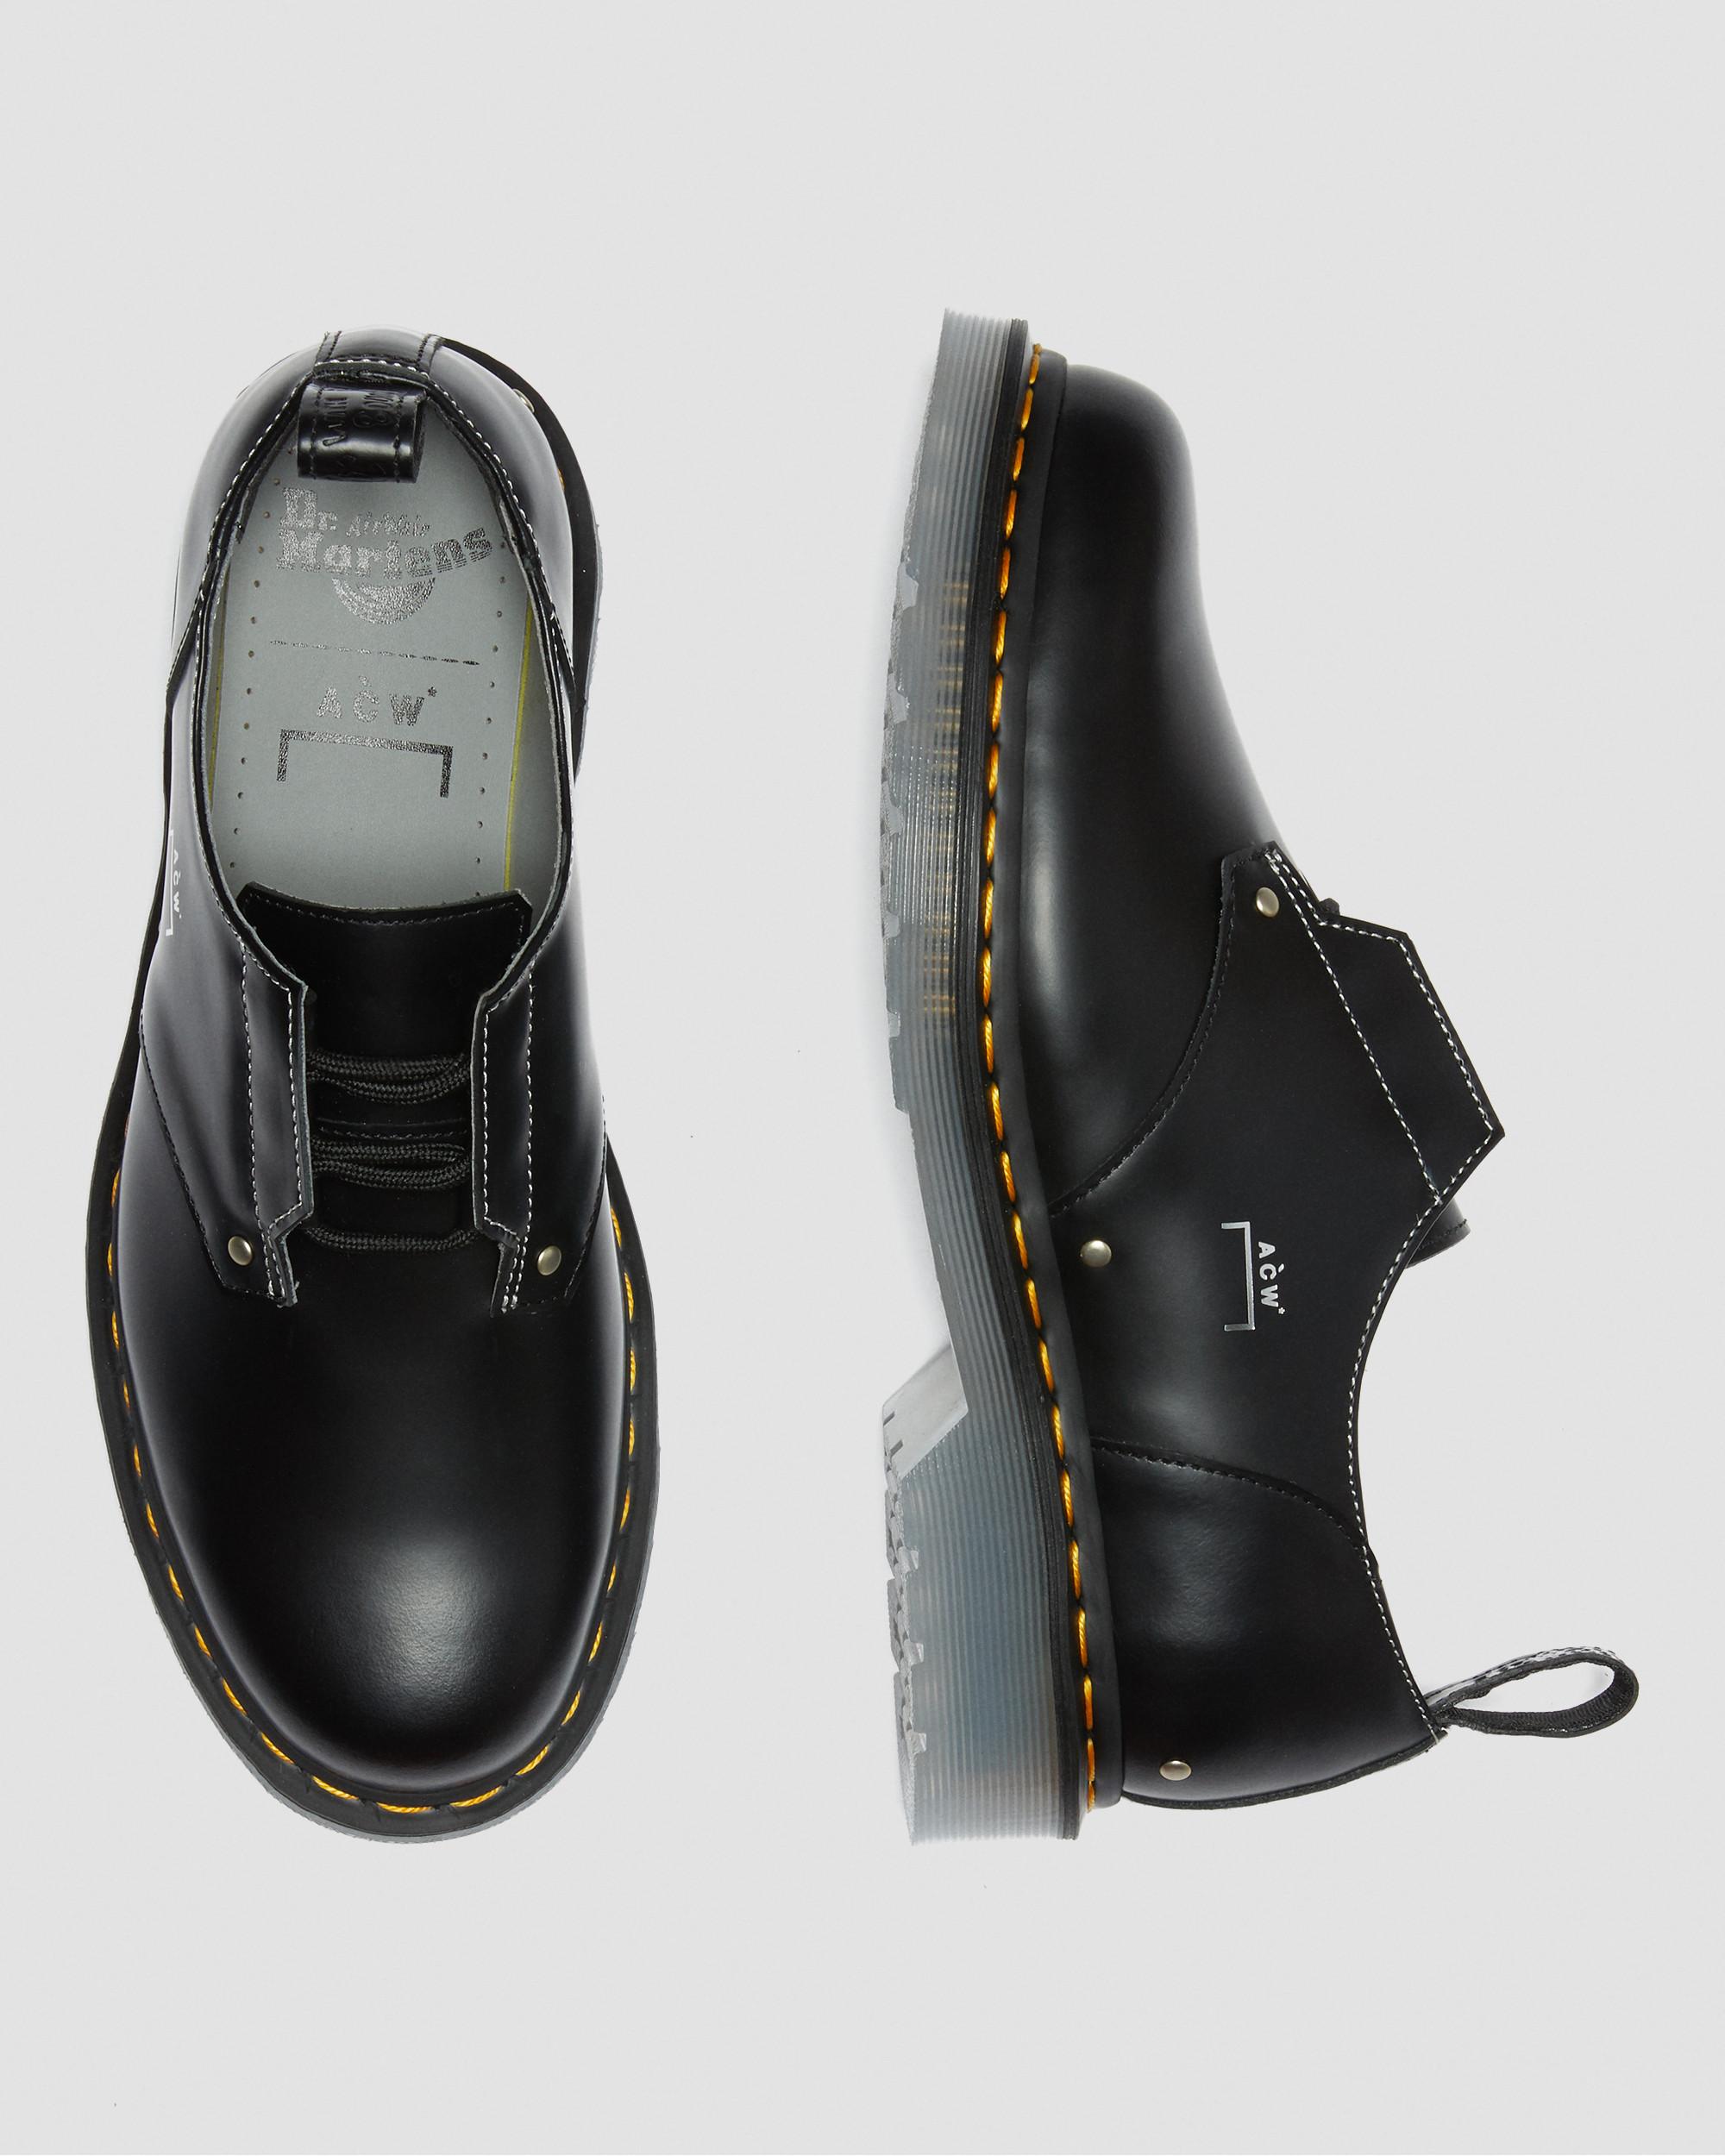 1461 Iced ACW* Leather Oxford Shoes | Dr. Martens